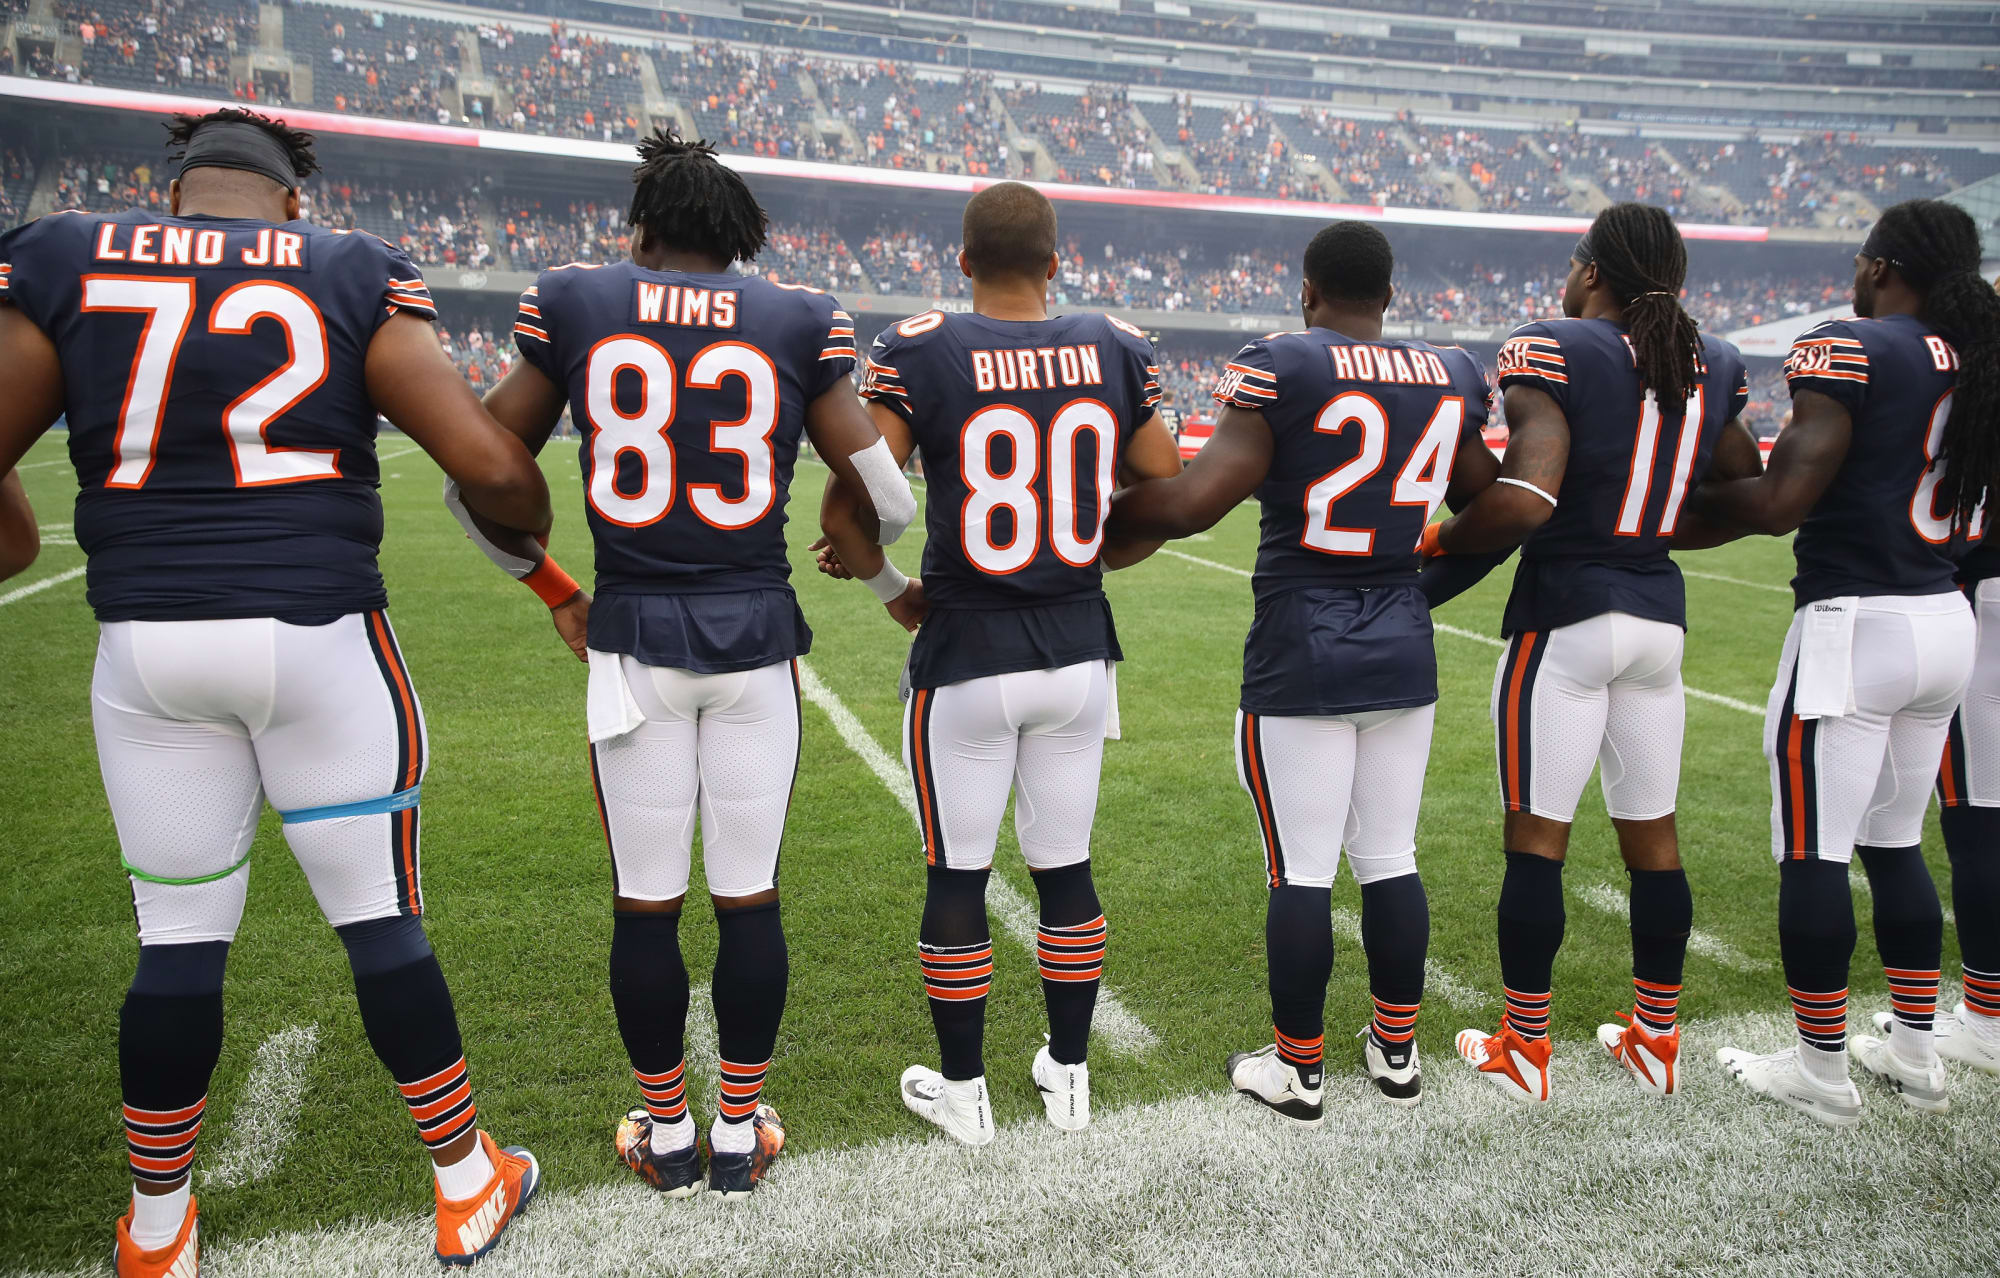 Chicago Bears: See full 53-man roster plus analysis and reaction - Page 3